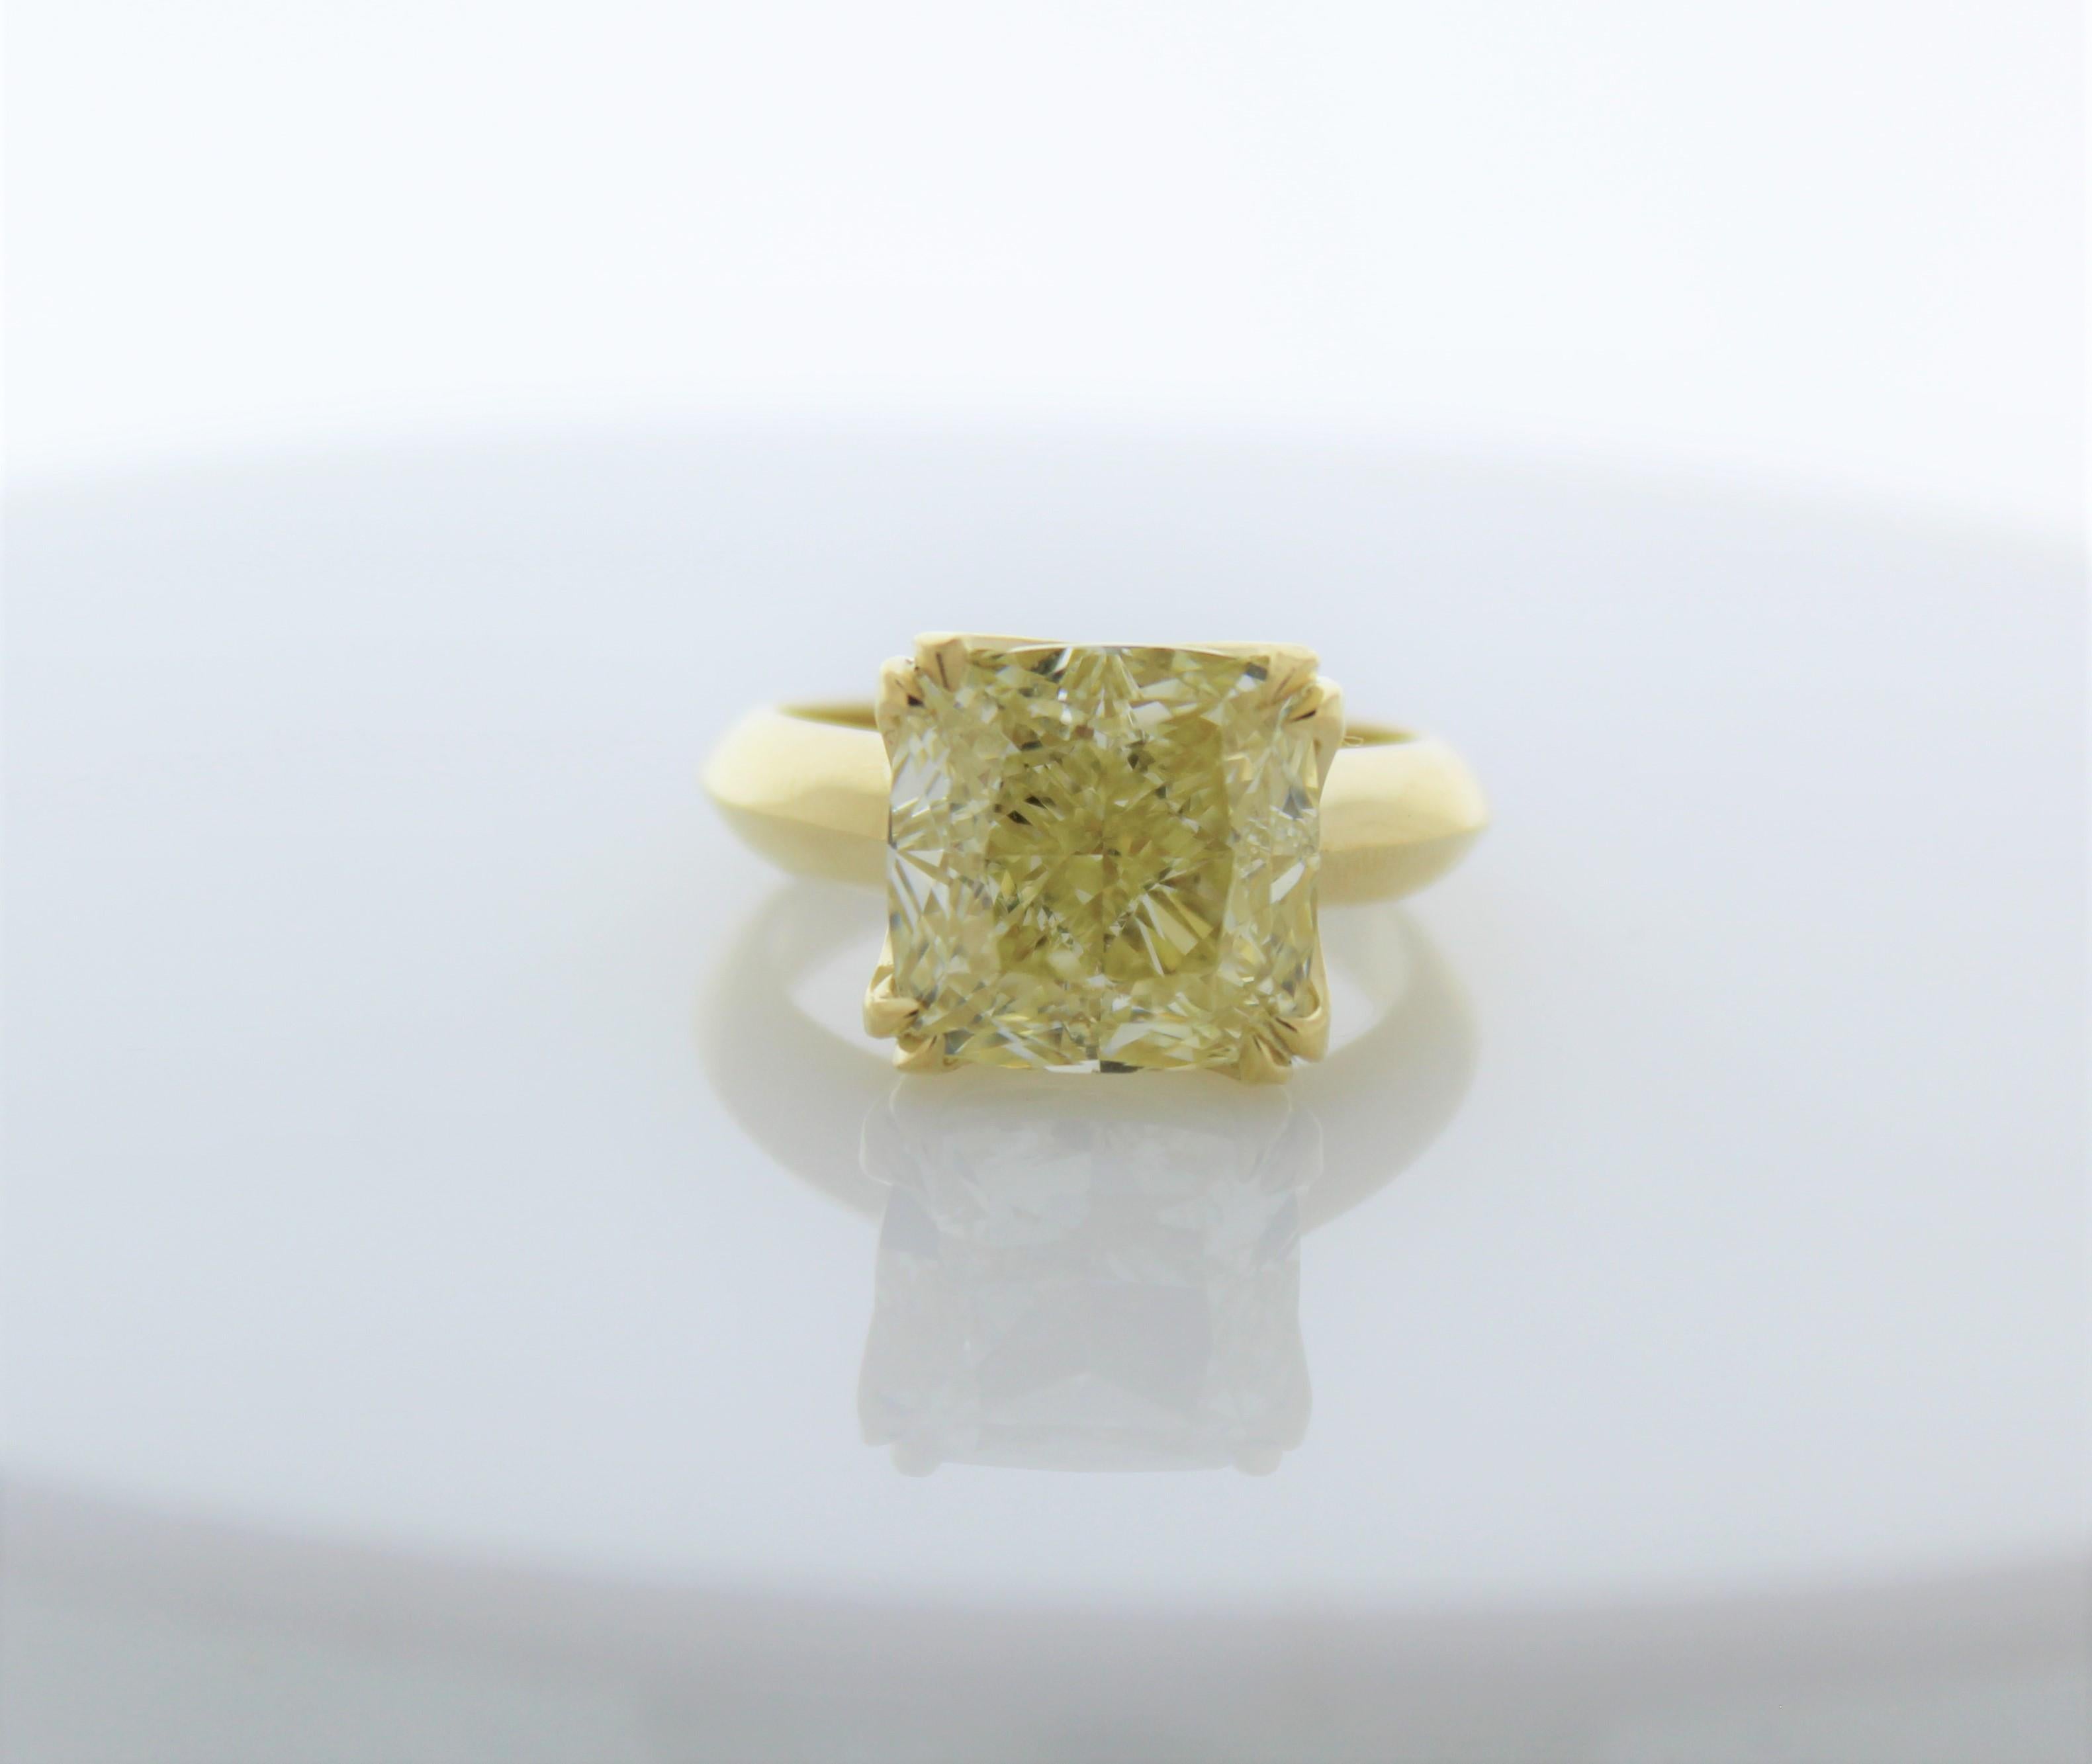 Before we get into the details, take a moment to soak in the lavishness and exceptional beauty of this ring. It’s made to turn heads and endure for a lifetime. A richly saturated 8.02CTW GIA certified natural cushion-cut, lemon-yellow diamond adorn